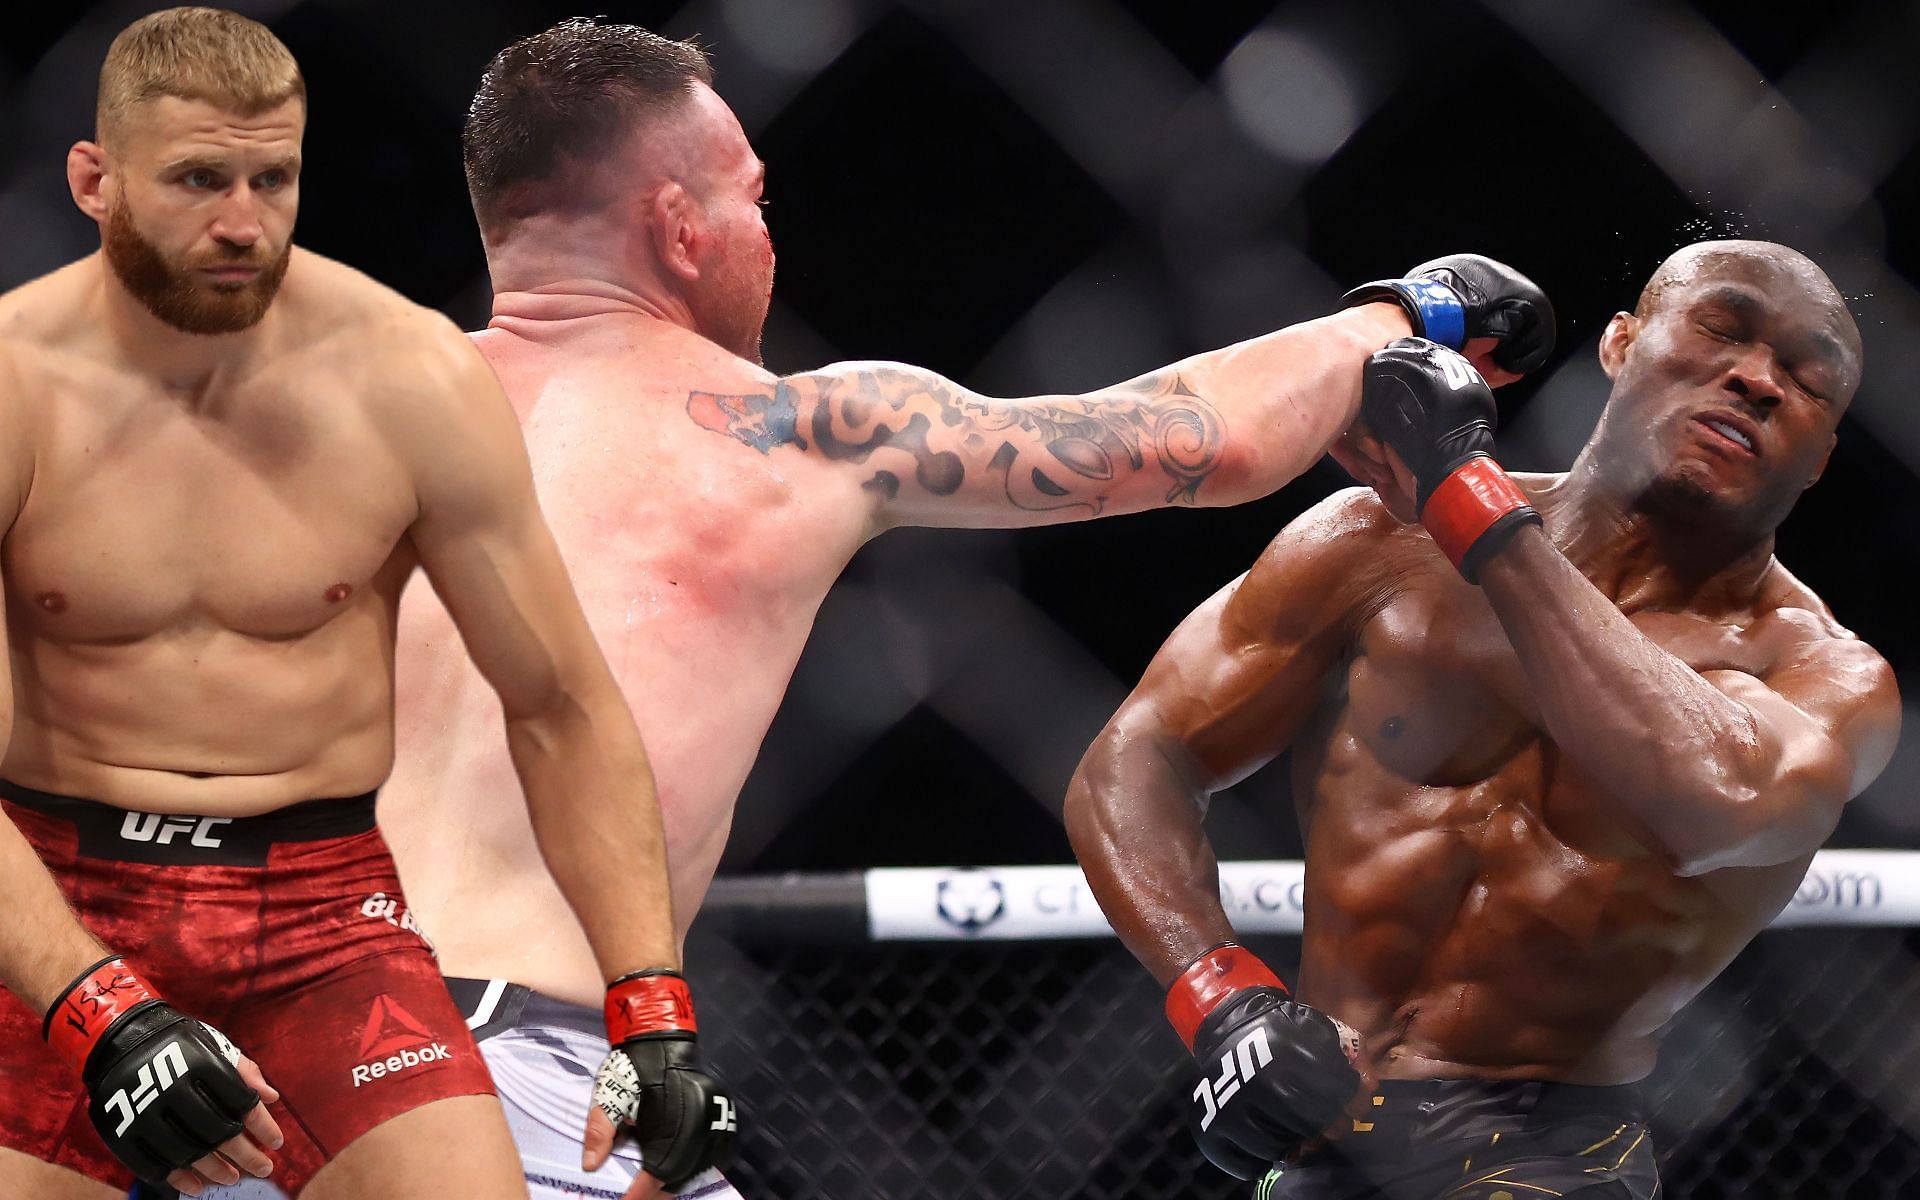 Jan Blachowicz (left), Colby Covington (center), and Kamaru Usman (right) (Images via Getty)